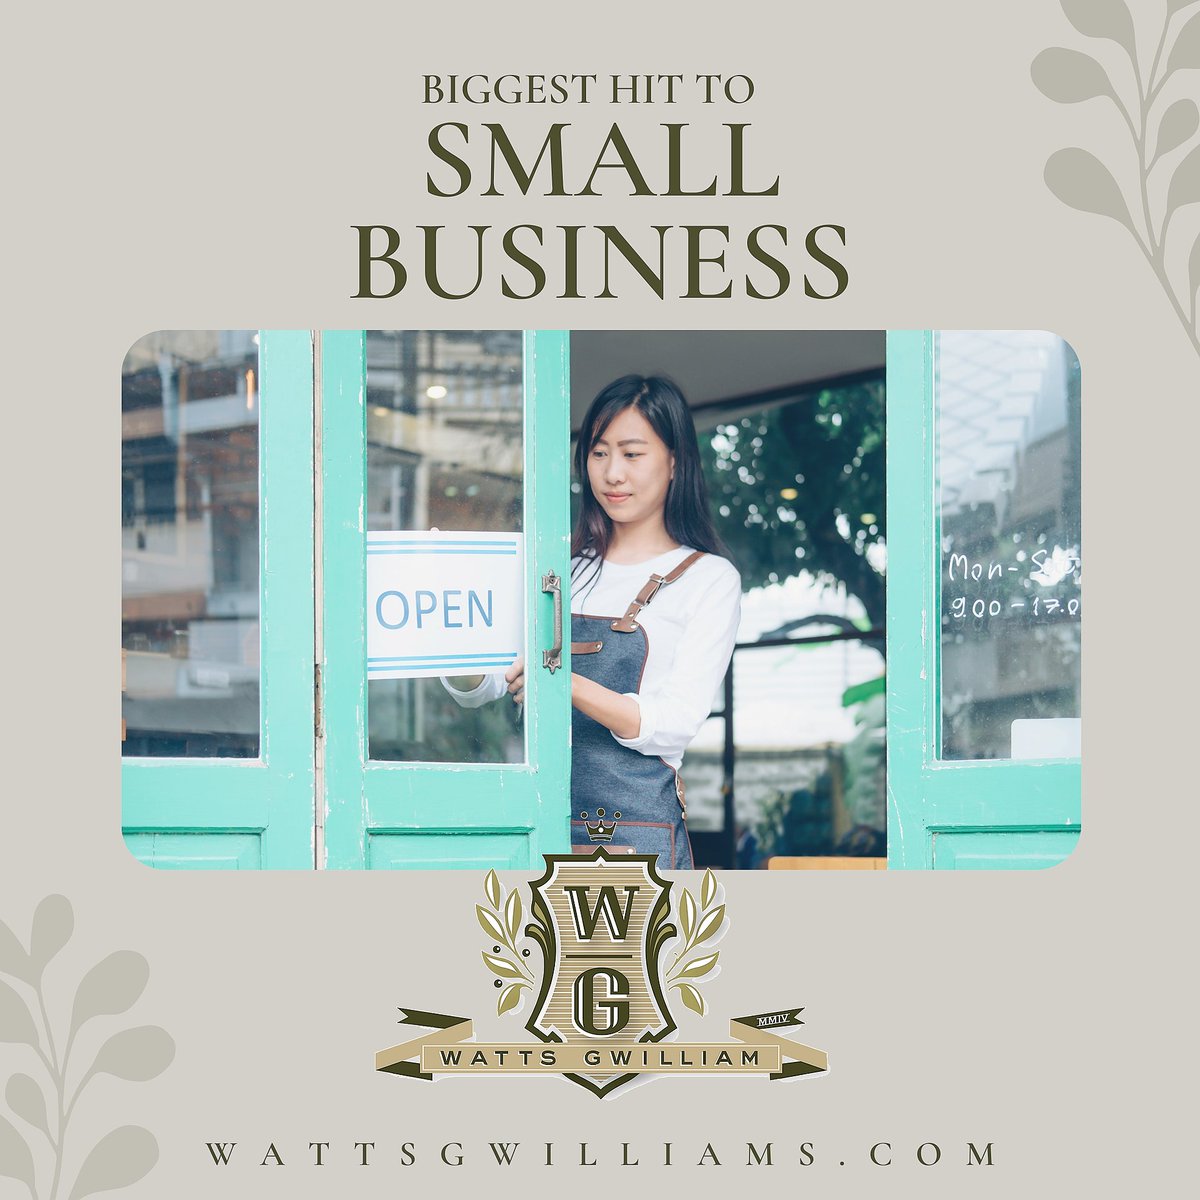 Small businesses tend to be greatly challenged during inflationary times, but why? What are the details? Read more, here: wattsgwilliam.com/market-volatil… #smallbusiness #inflation #smallbizusa